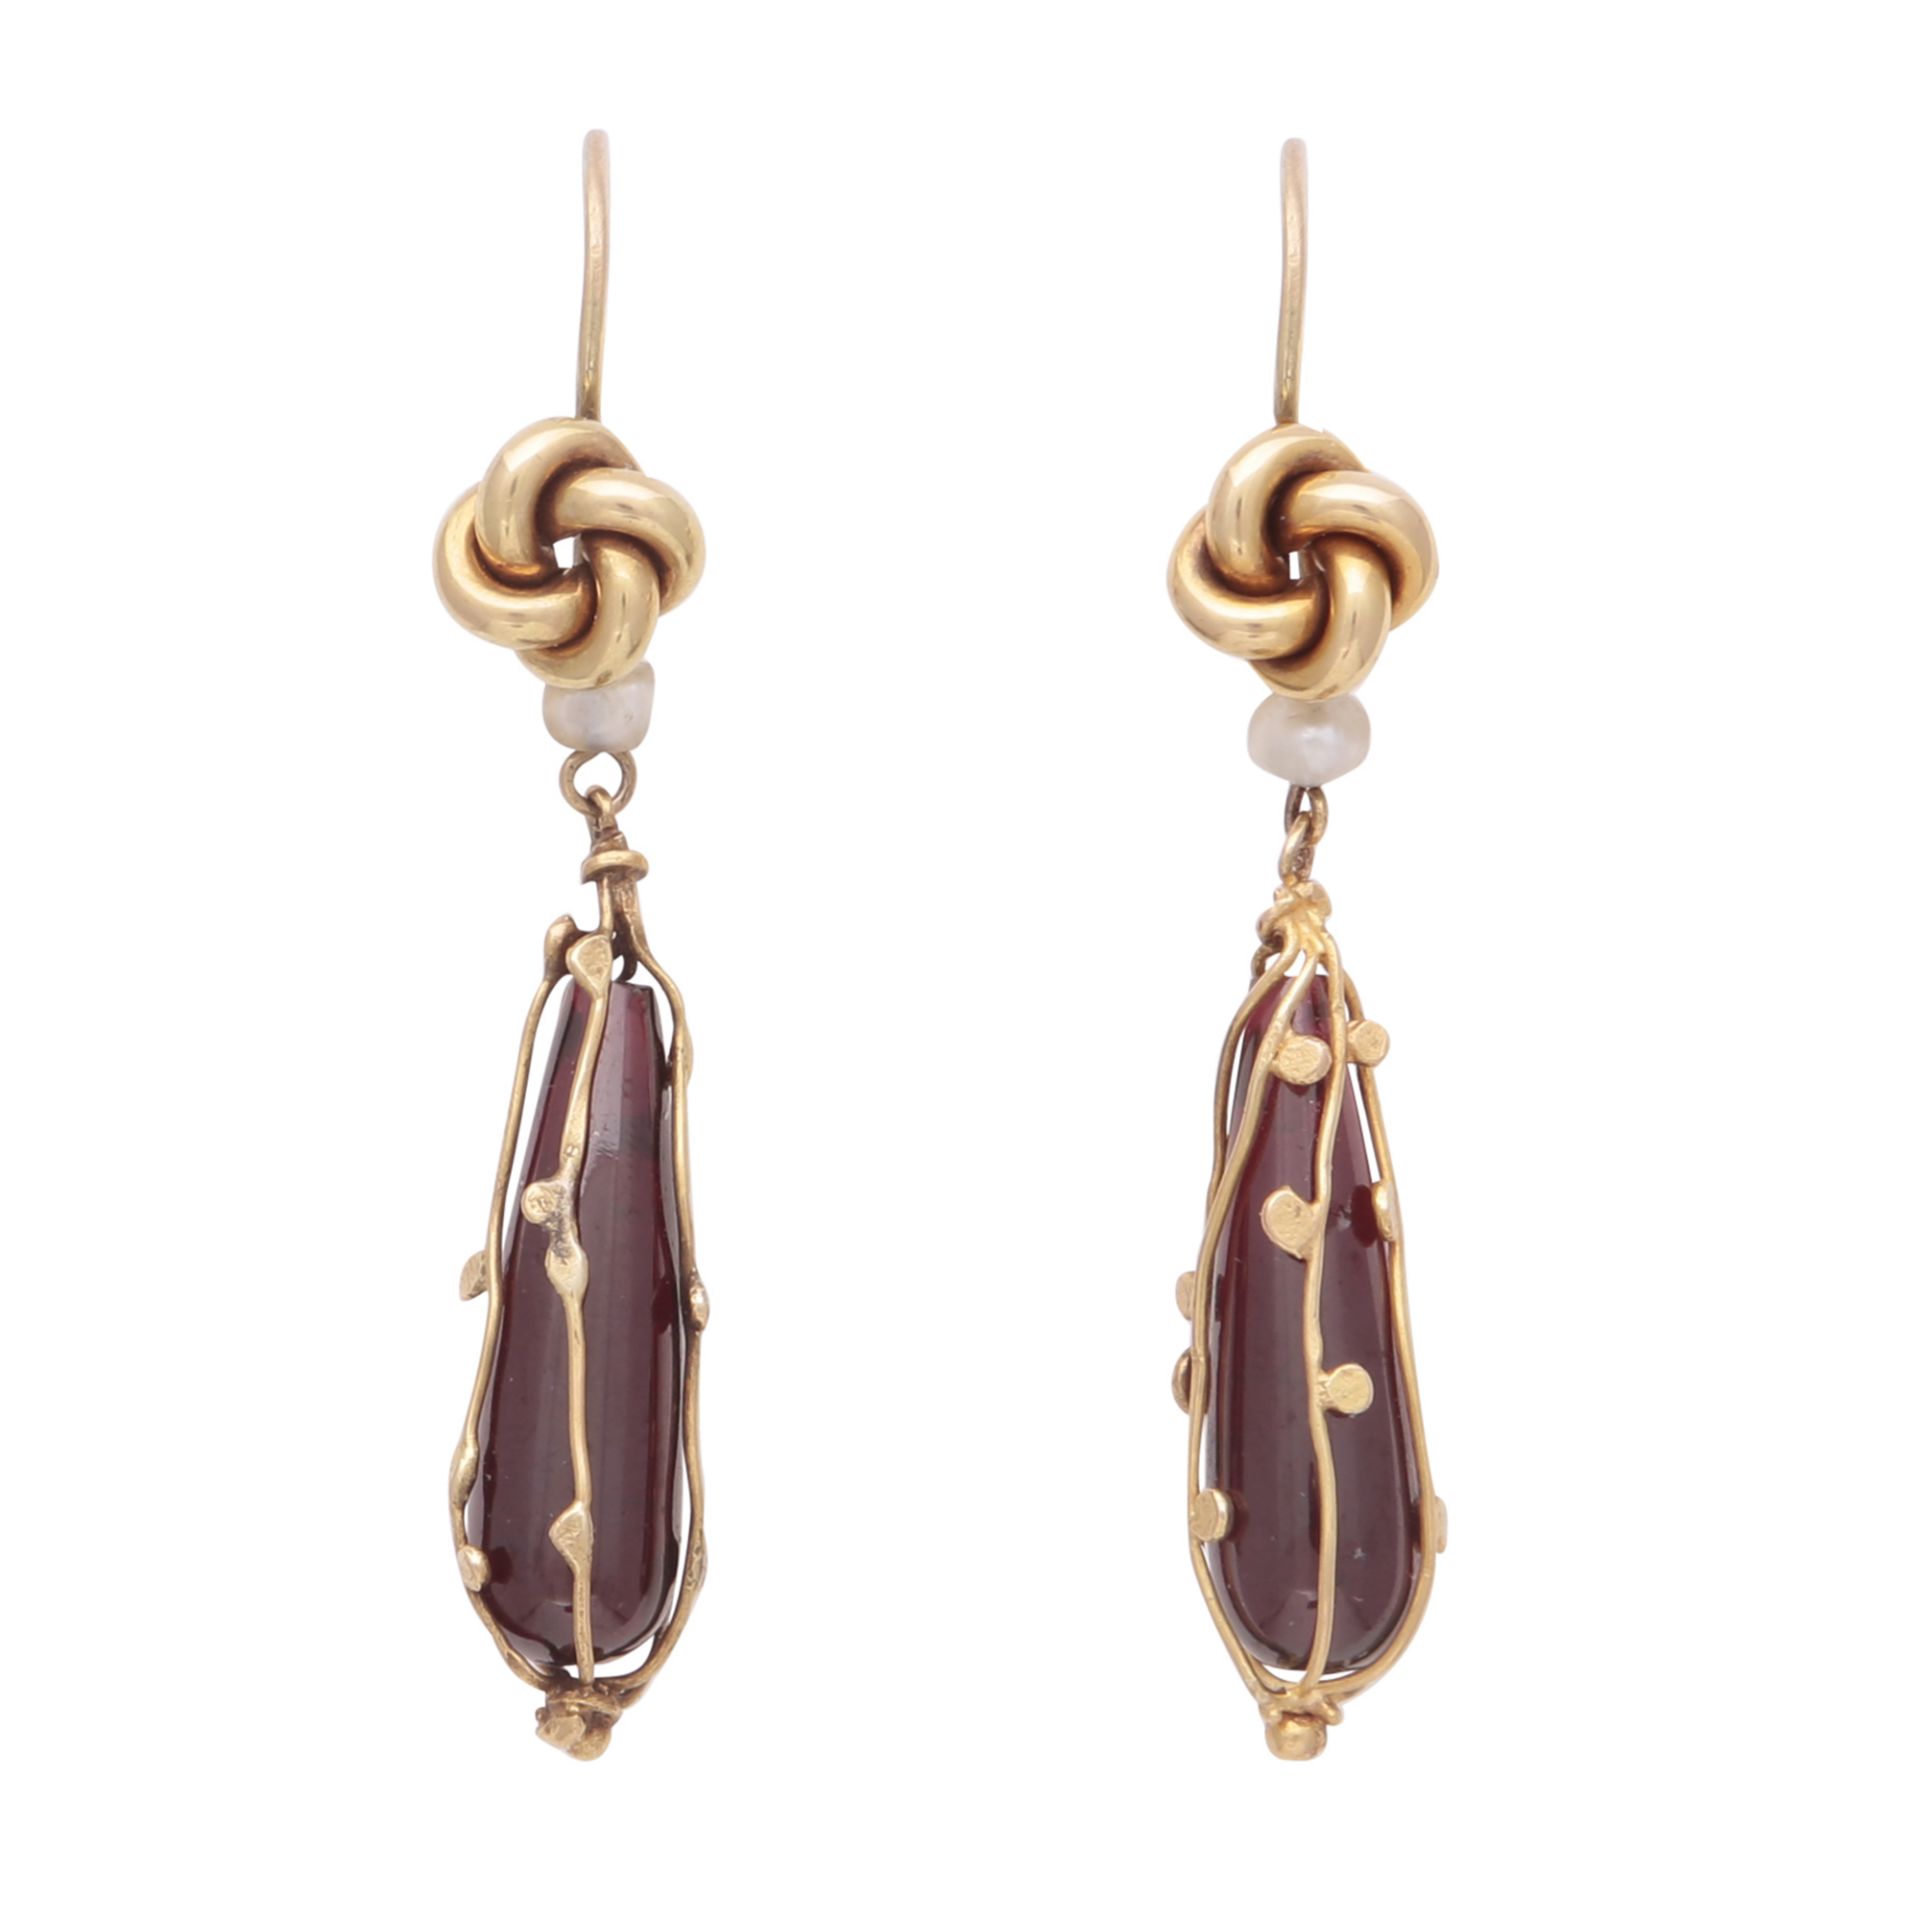 A pair of antique garnet and pearl drop earrings in yellow gold each designed as a cabochon drop